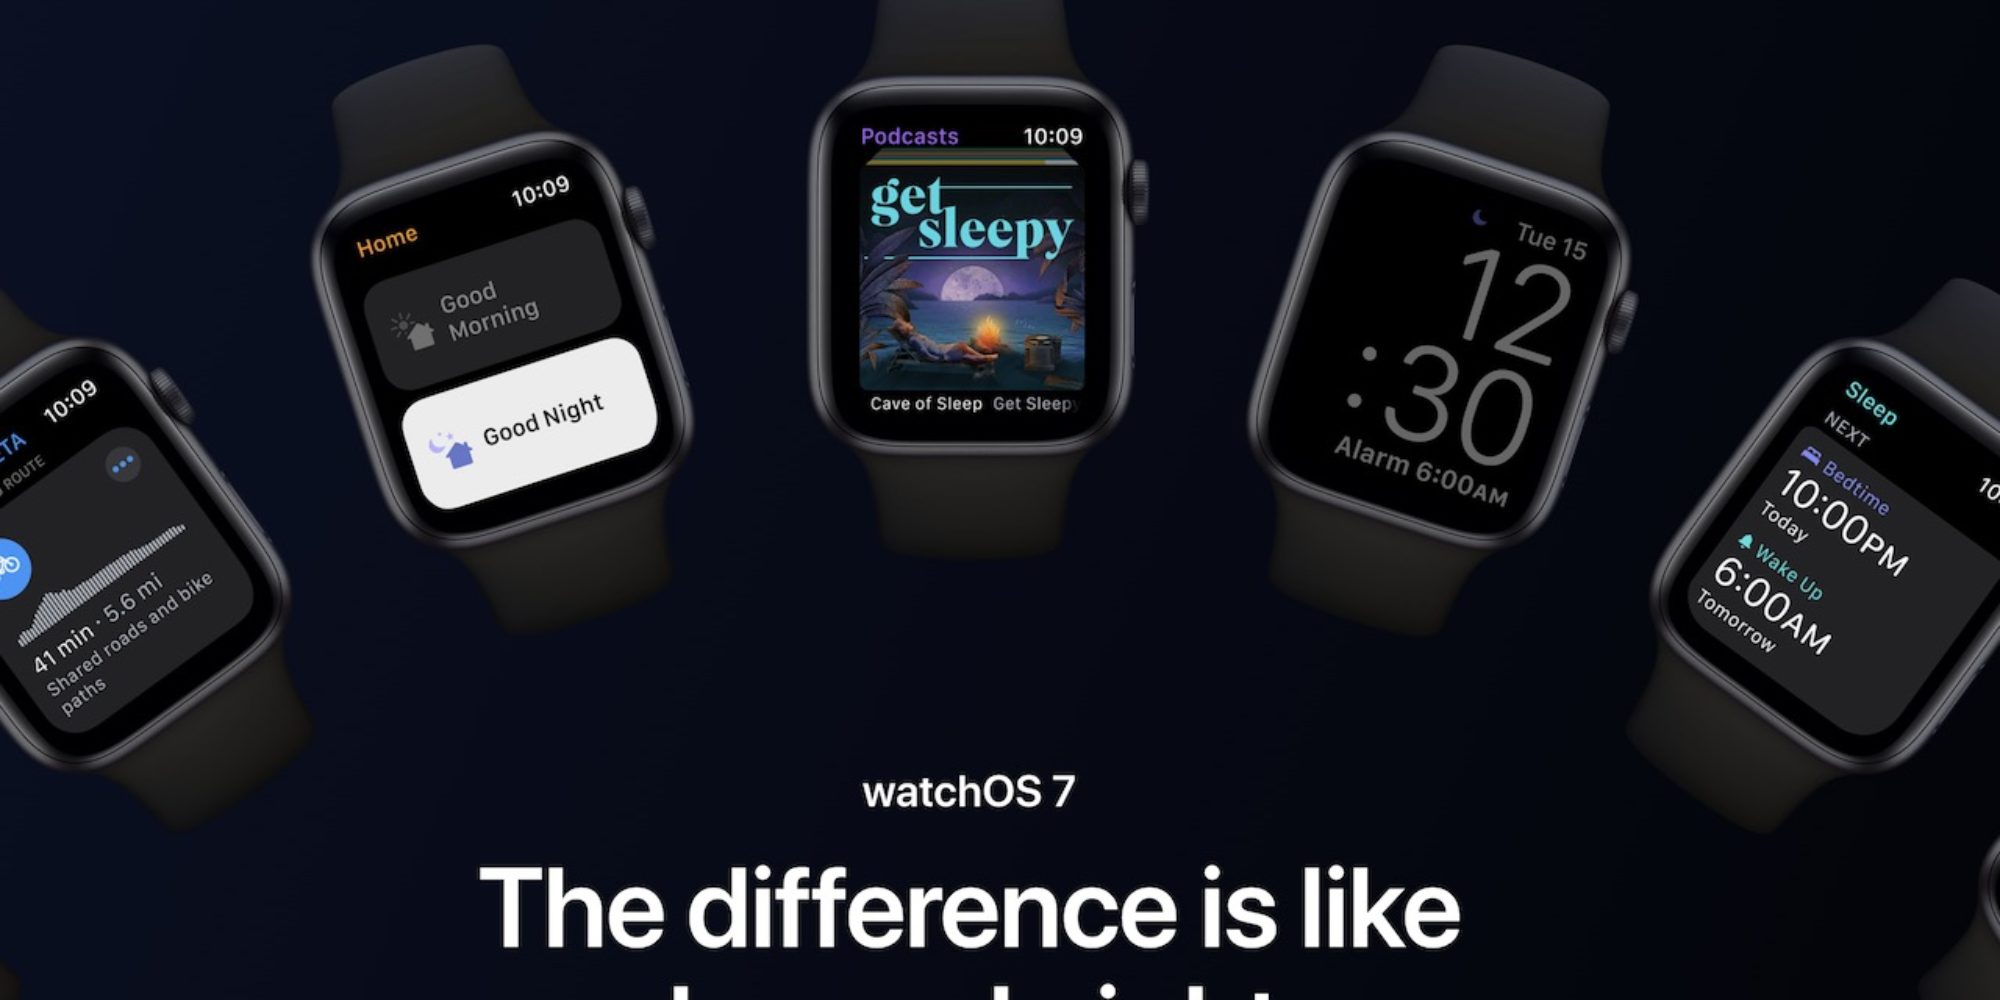 Our Four Favorite Features of watchOS 7